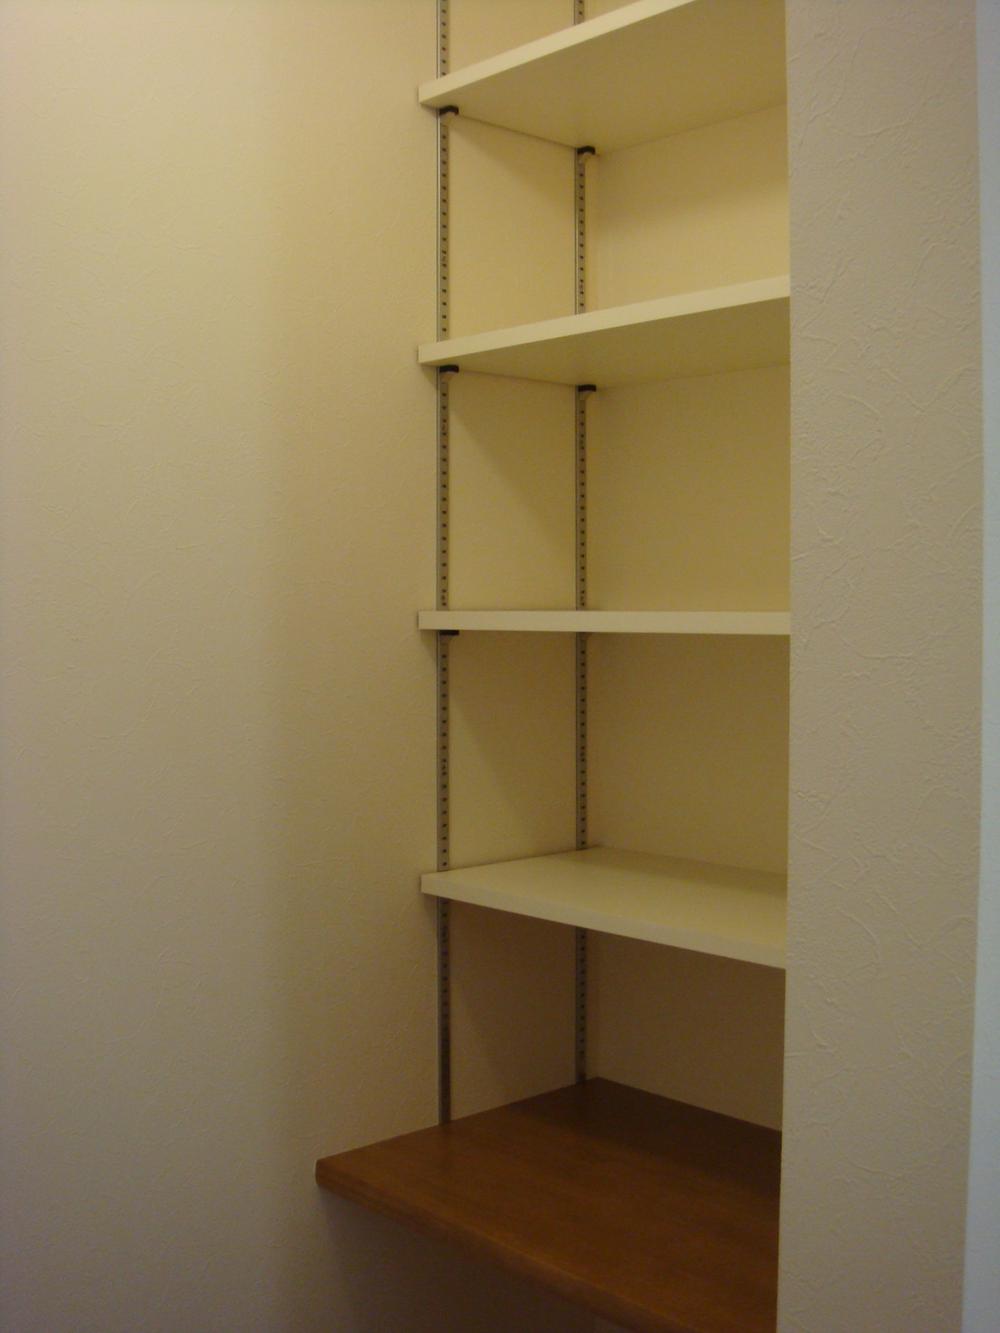 Same specifications photos (Other introspection). Also attached shelves to wash room. 